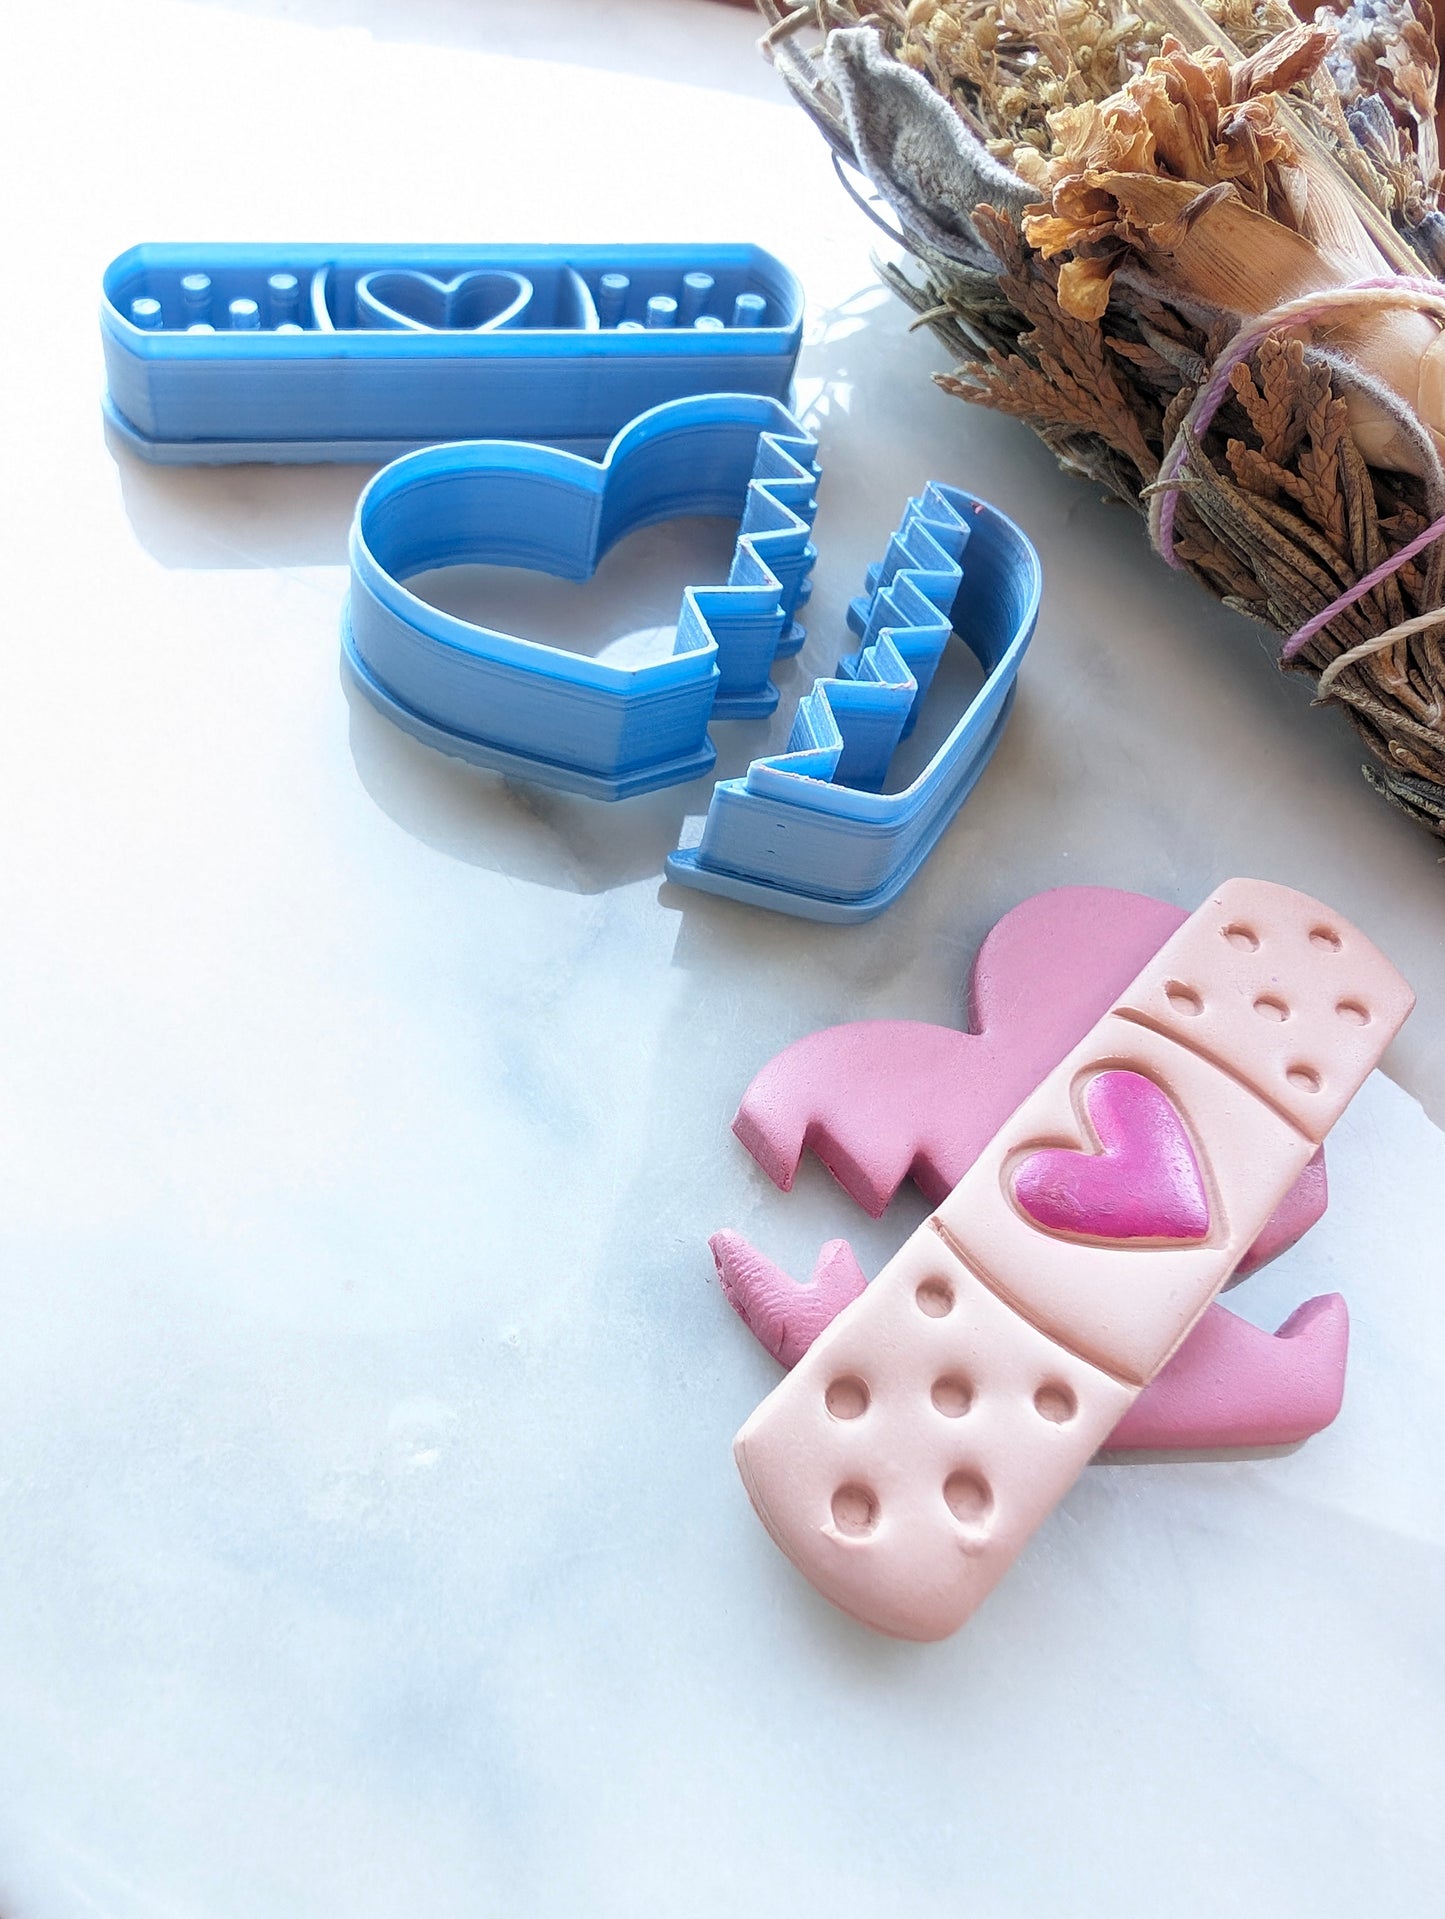 3-Piece Broken Heart with Bandage Sharp Clay Cutter